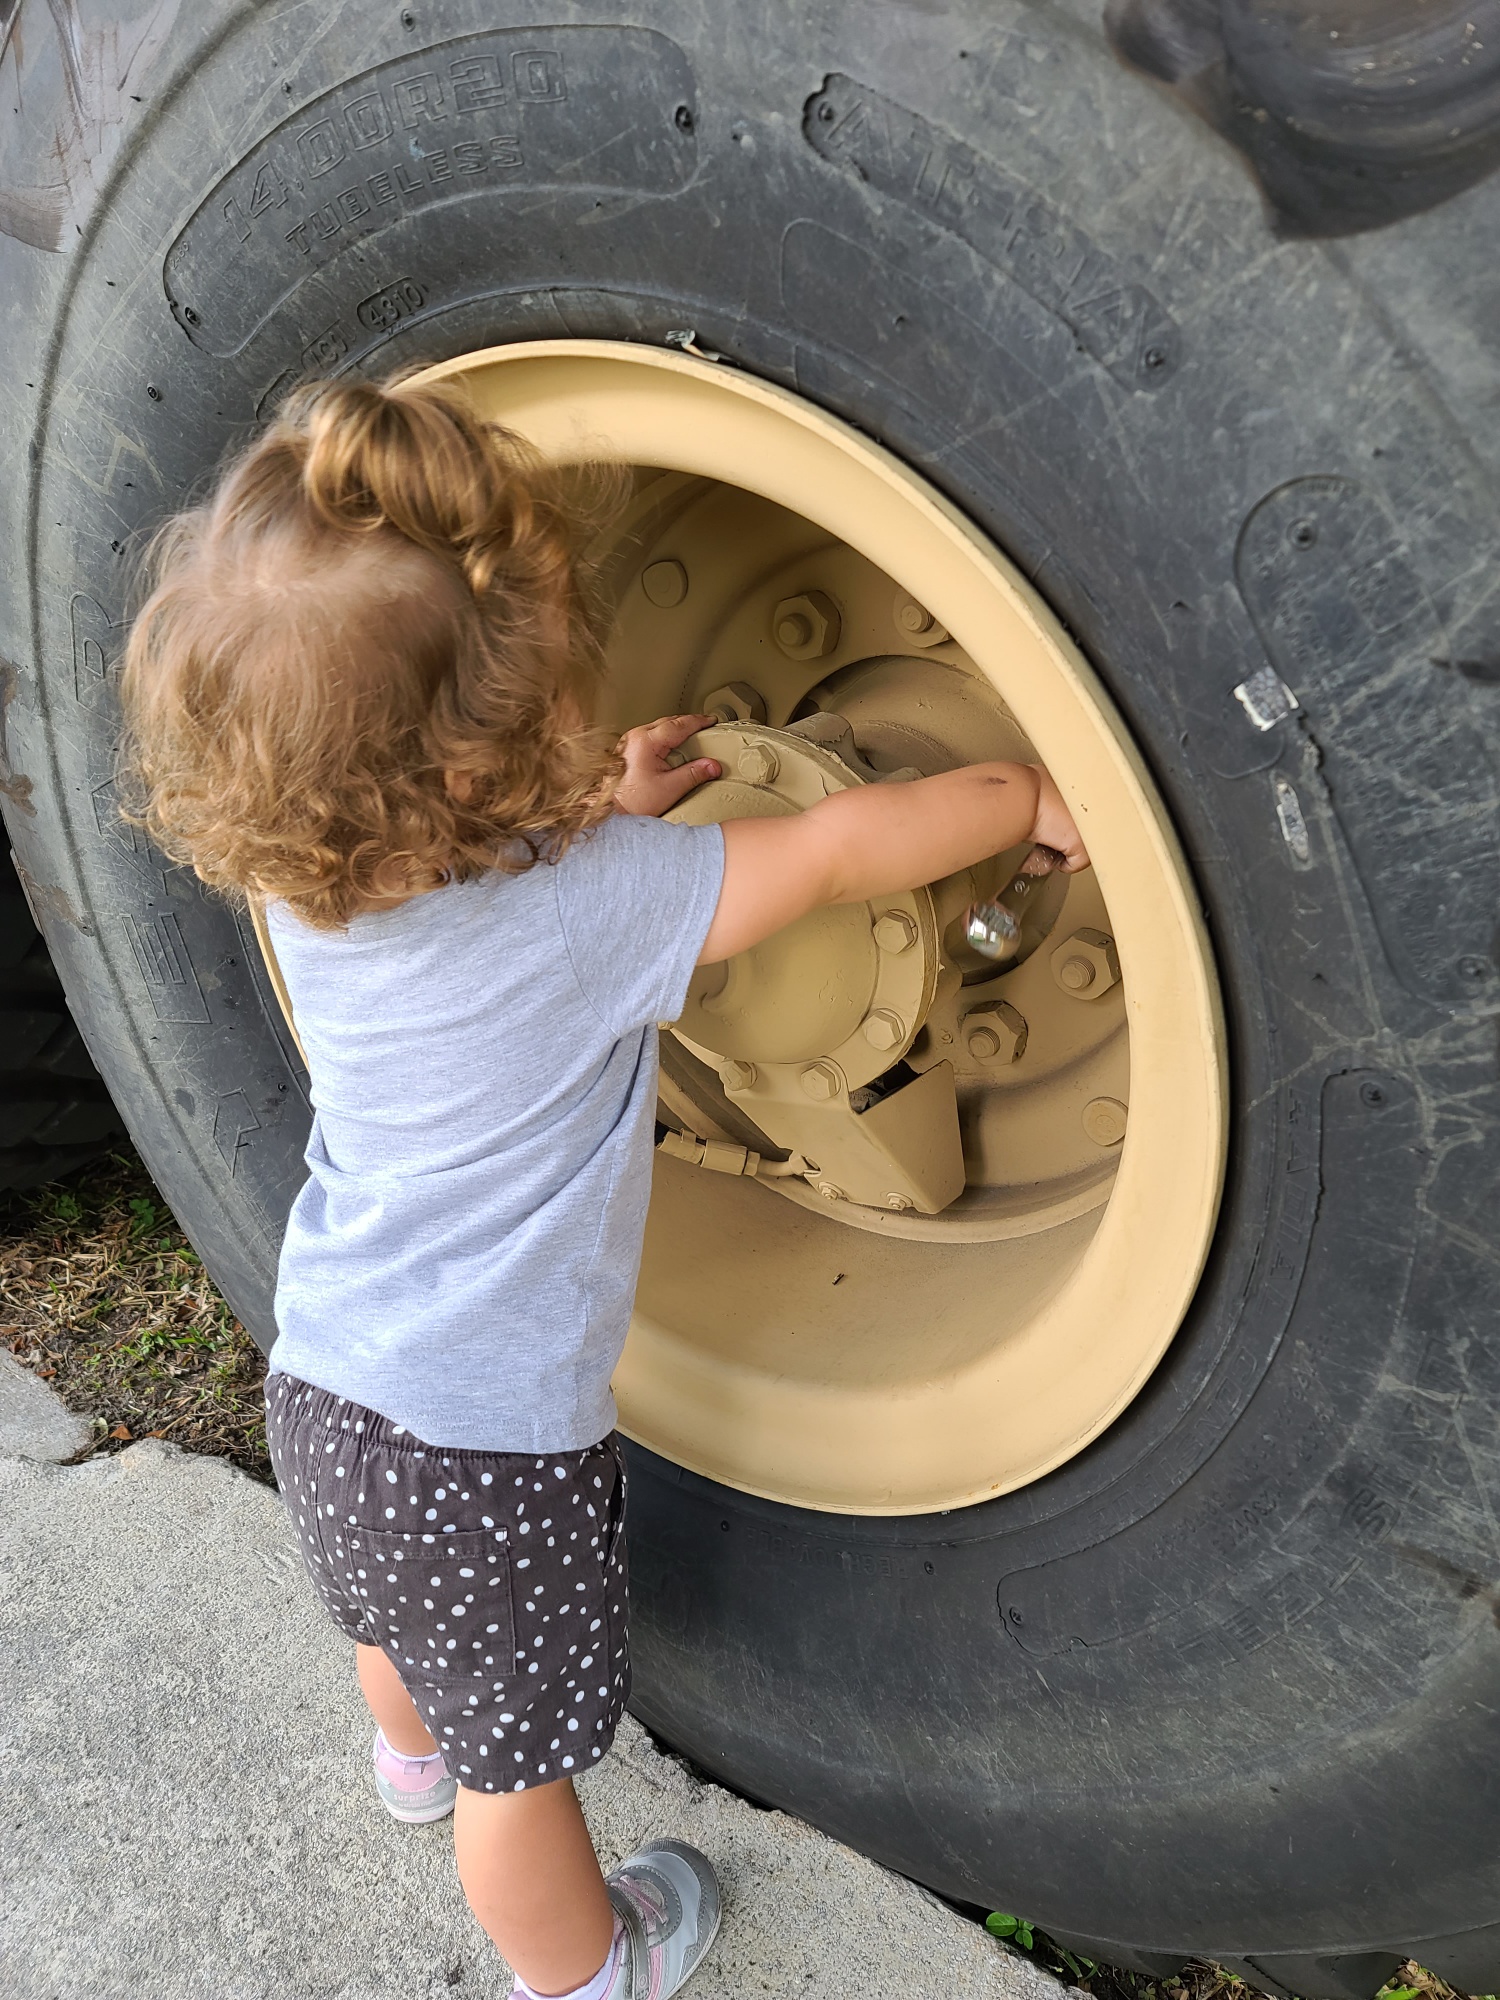 baby working on truck tire